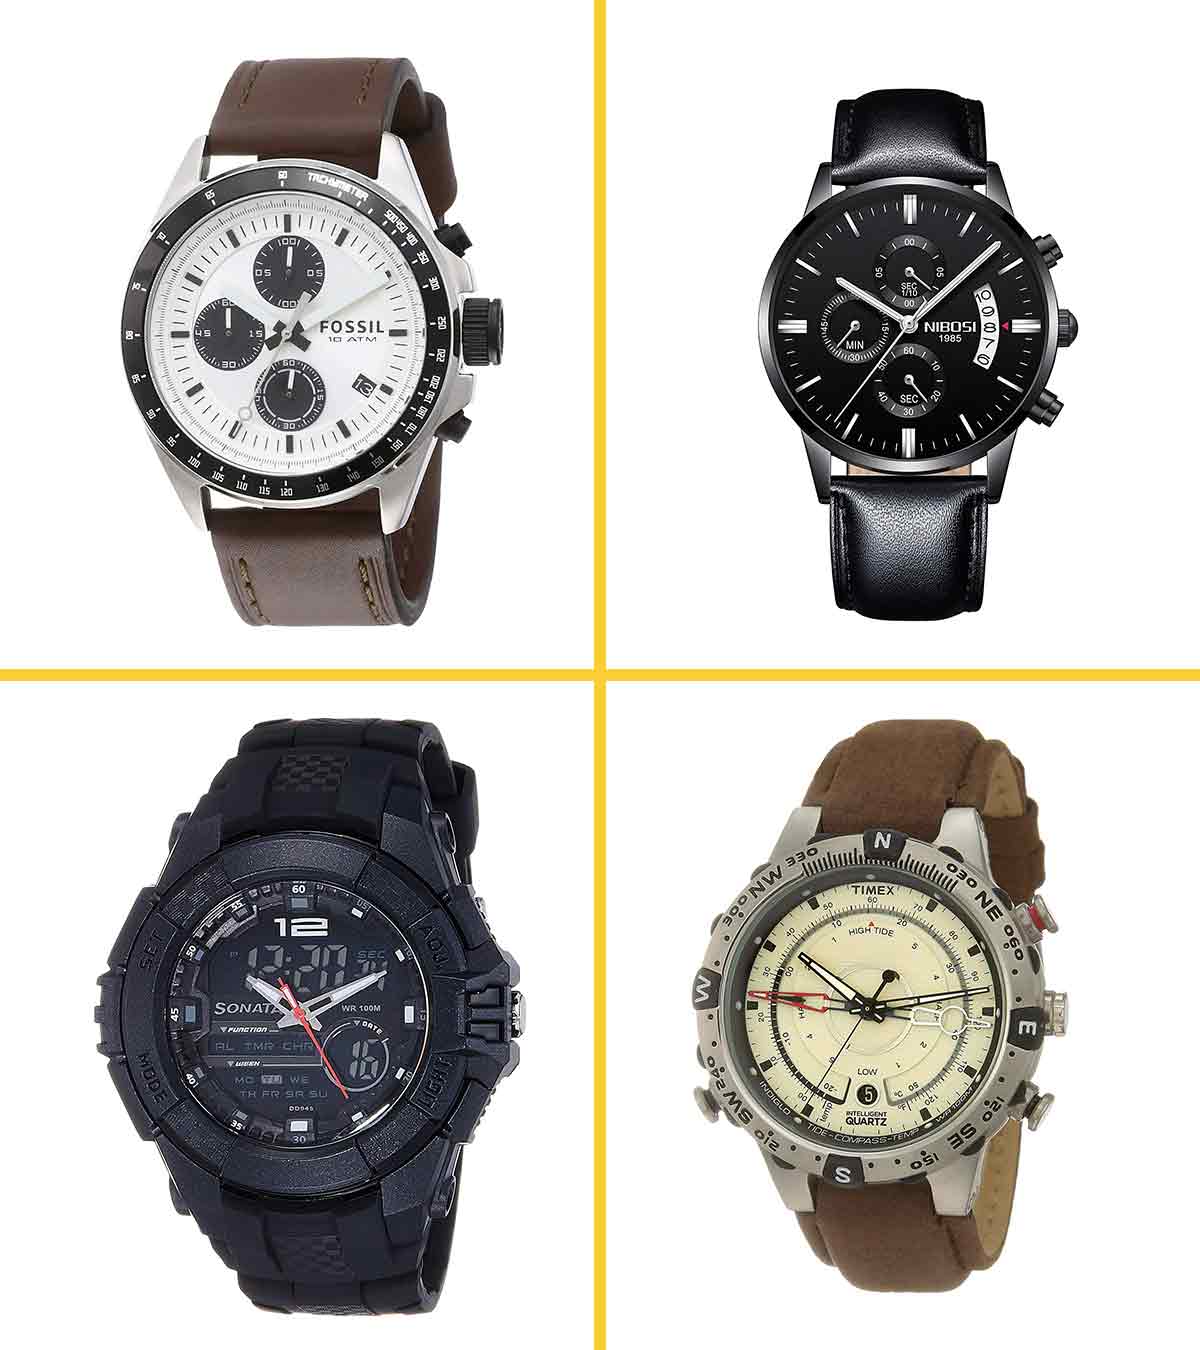 11 Best Chronograph Watches in India